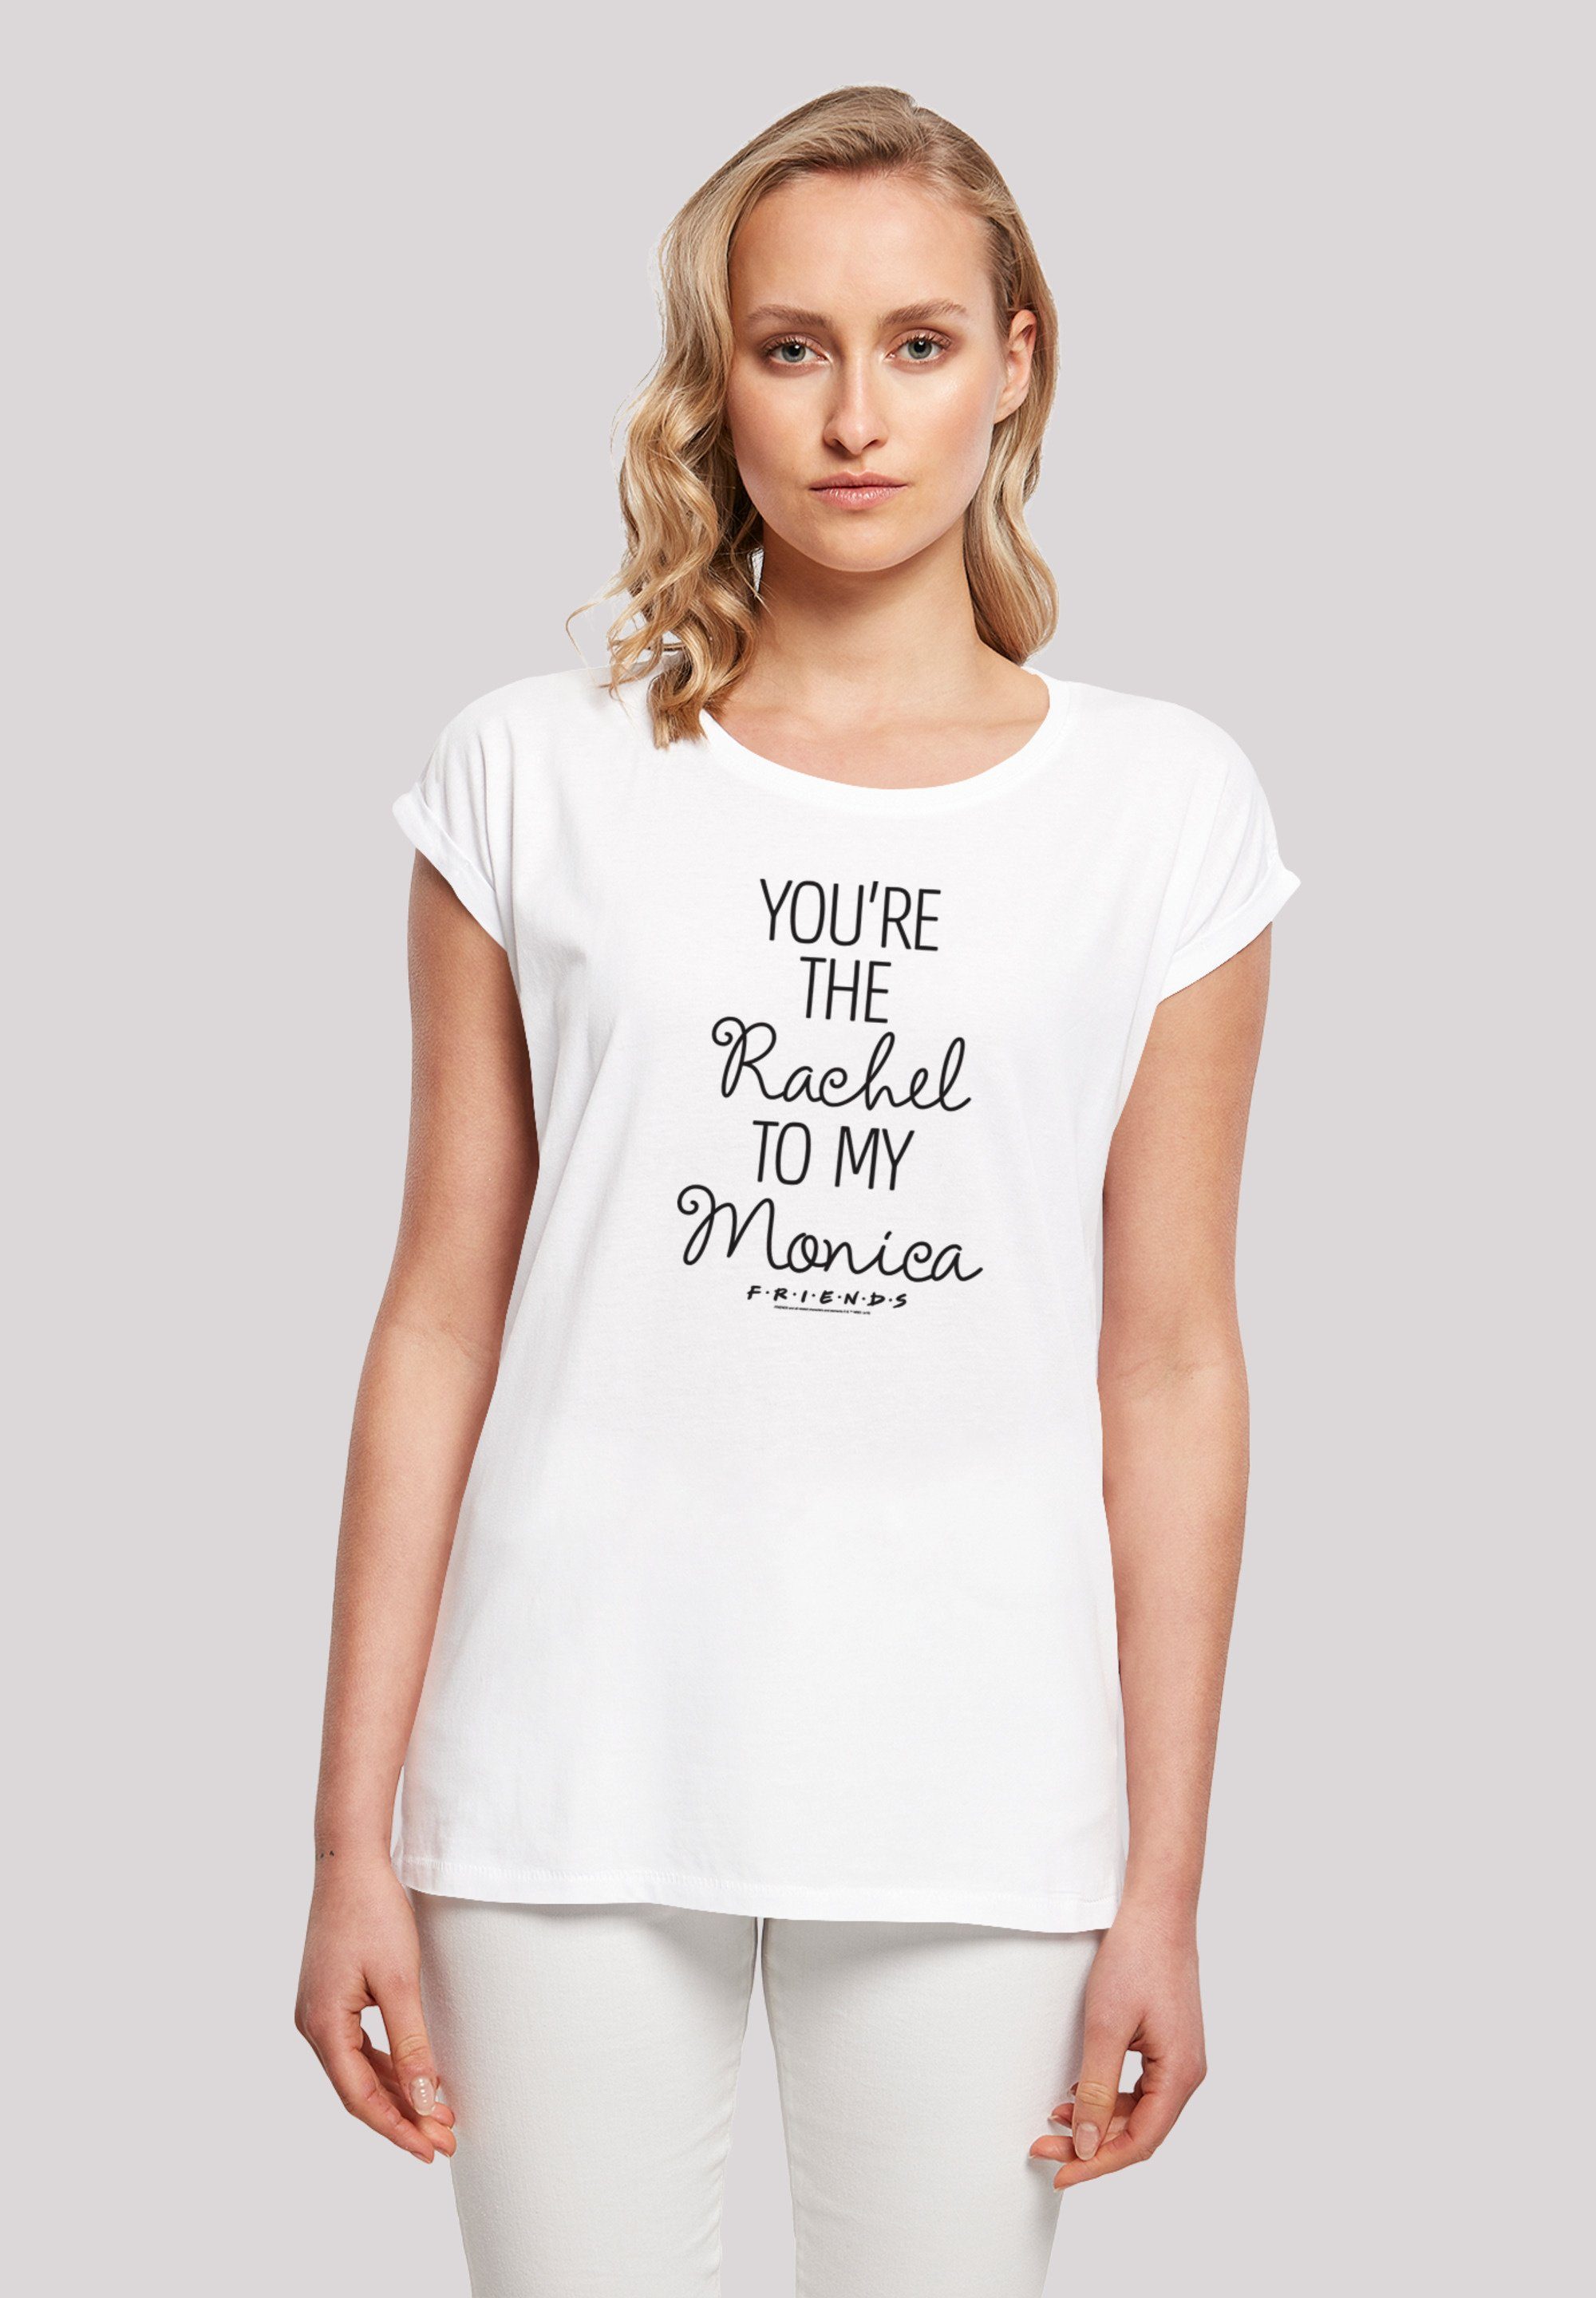 F4NT4STIC T-Shirt FRIENDS Youre The Rachel To My Monica Print